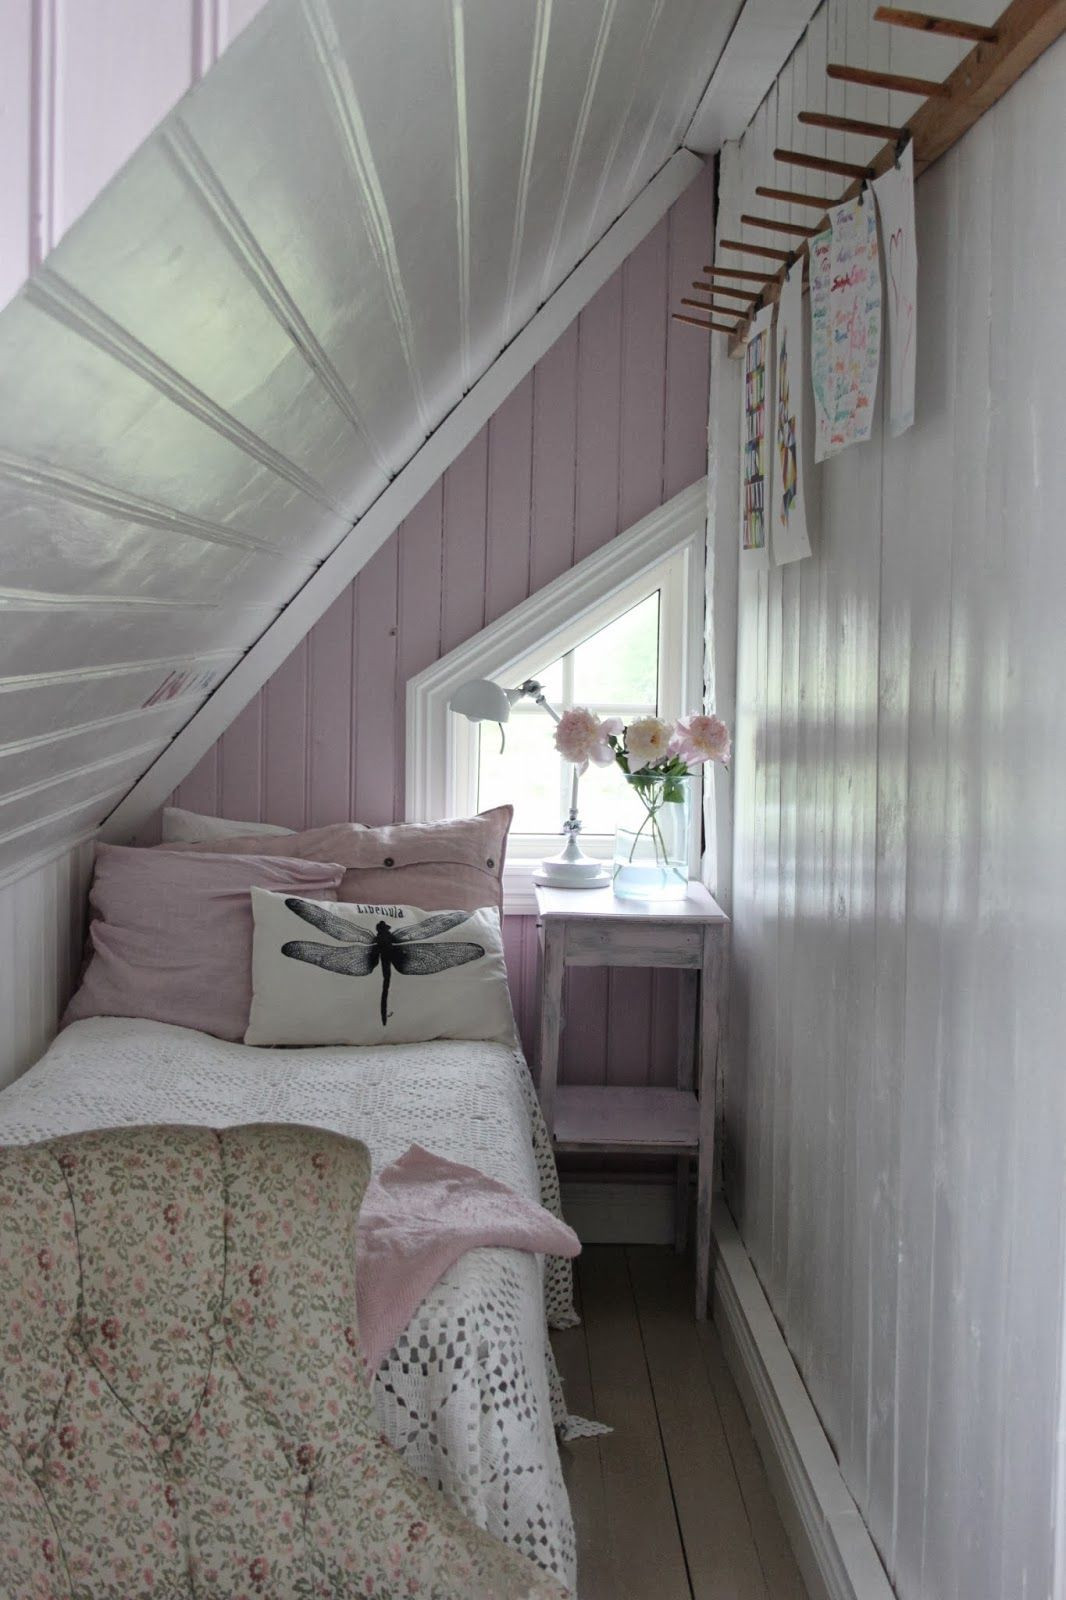 Small Attic Bedroom
 Small Attic Bedroom what Grandma would have called "The